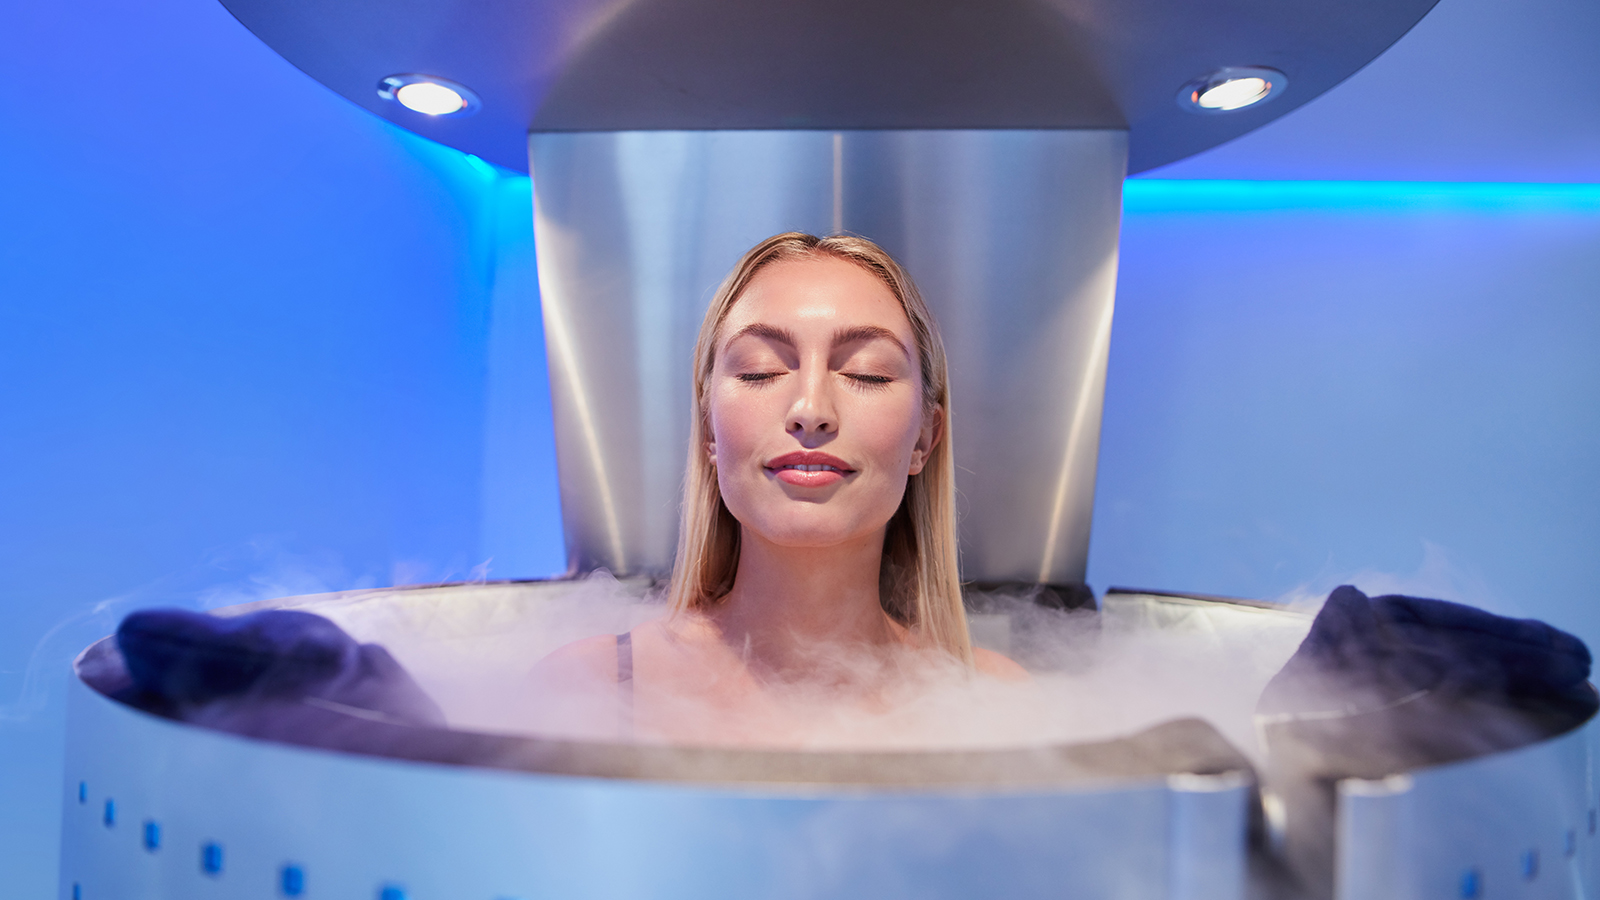 Portrait of happy young woman in a whole body cryotherapy cabin with her eyes closed. Cryosauna chamber for overall increase in muscular performance.